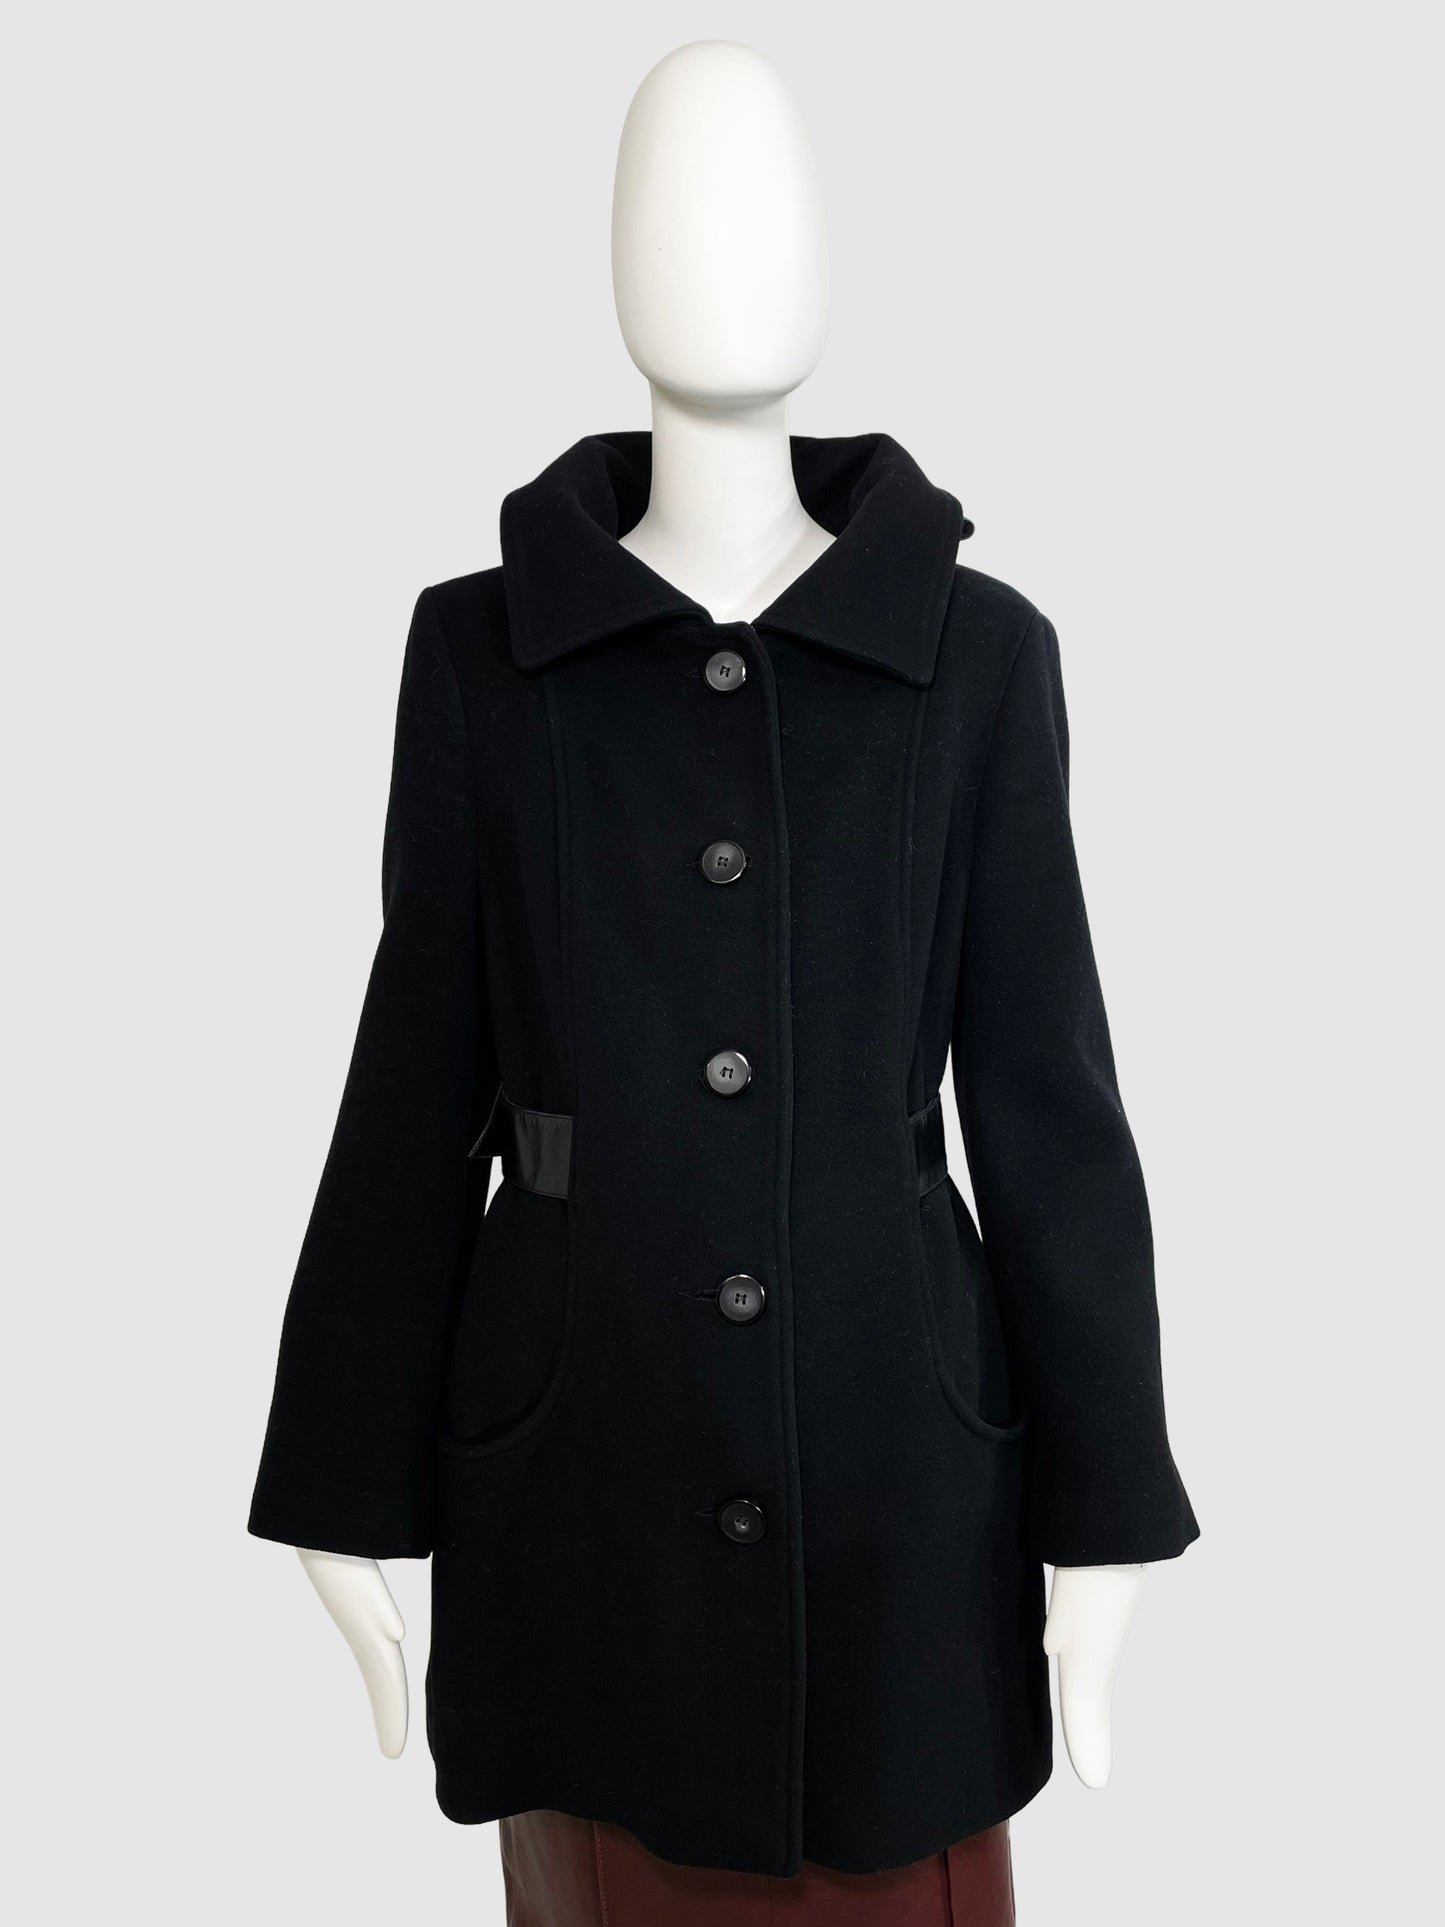 Mackage Wool Coat with Leather Belt - Size L